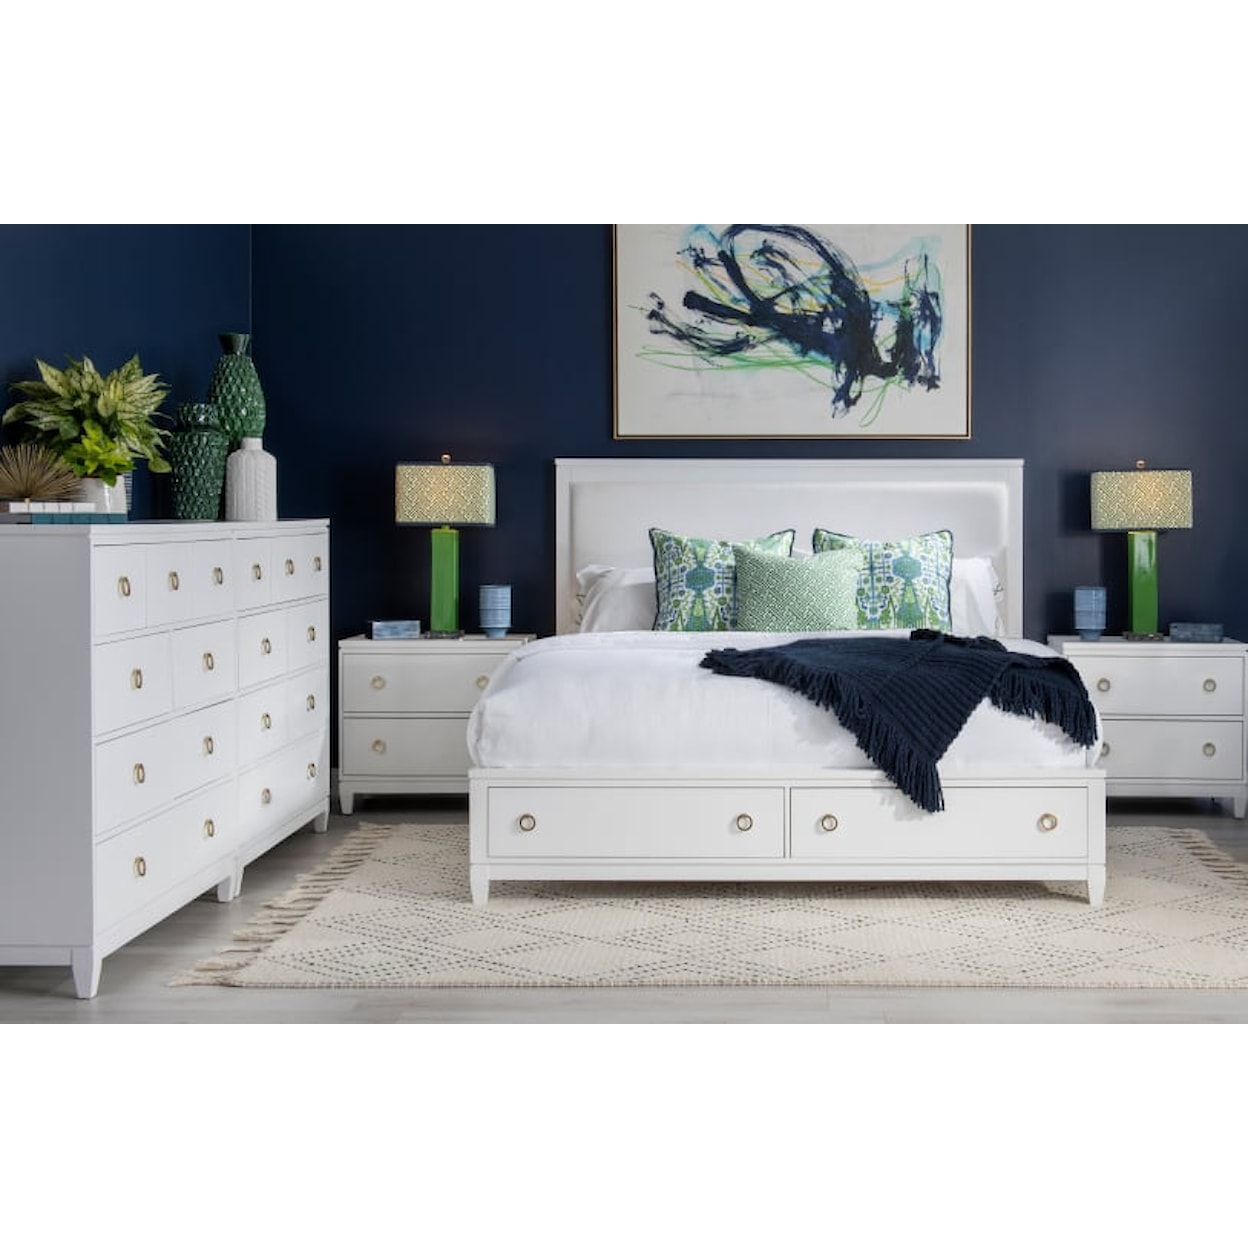 Legacy Classic Summerland King Upholstered Bed